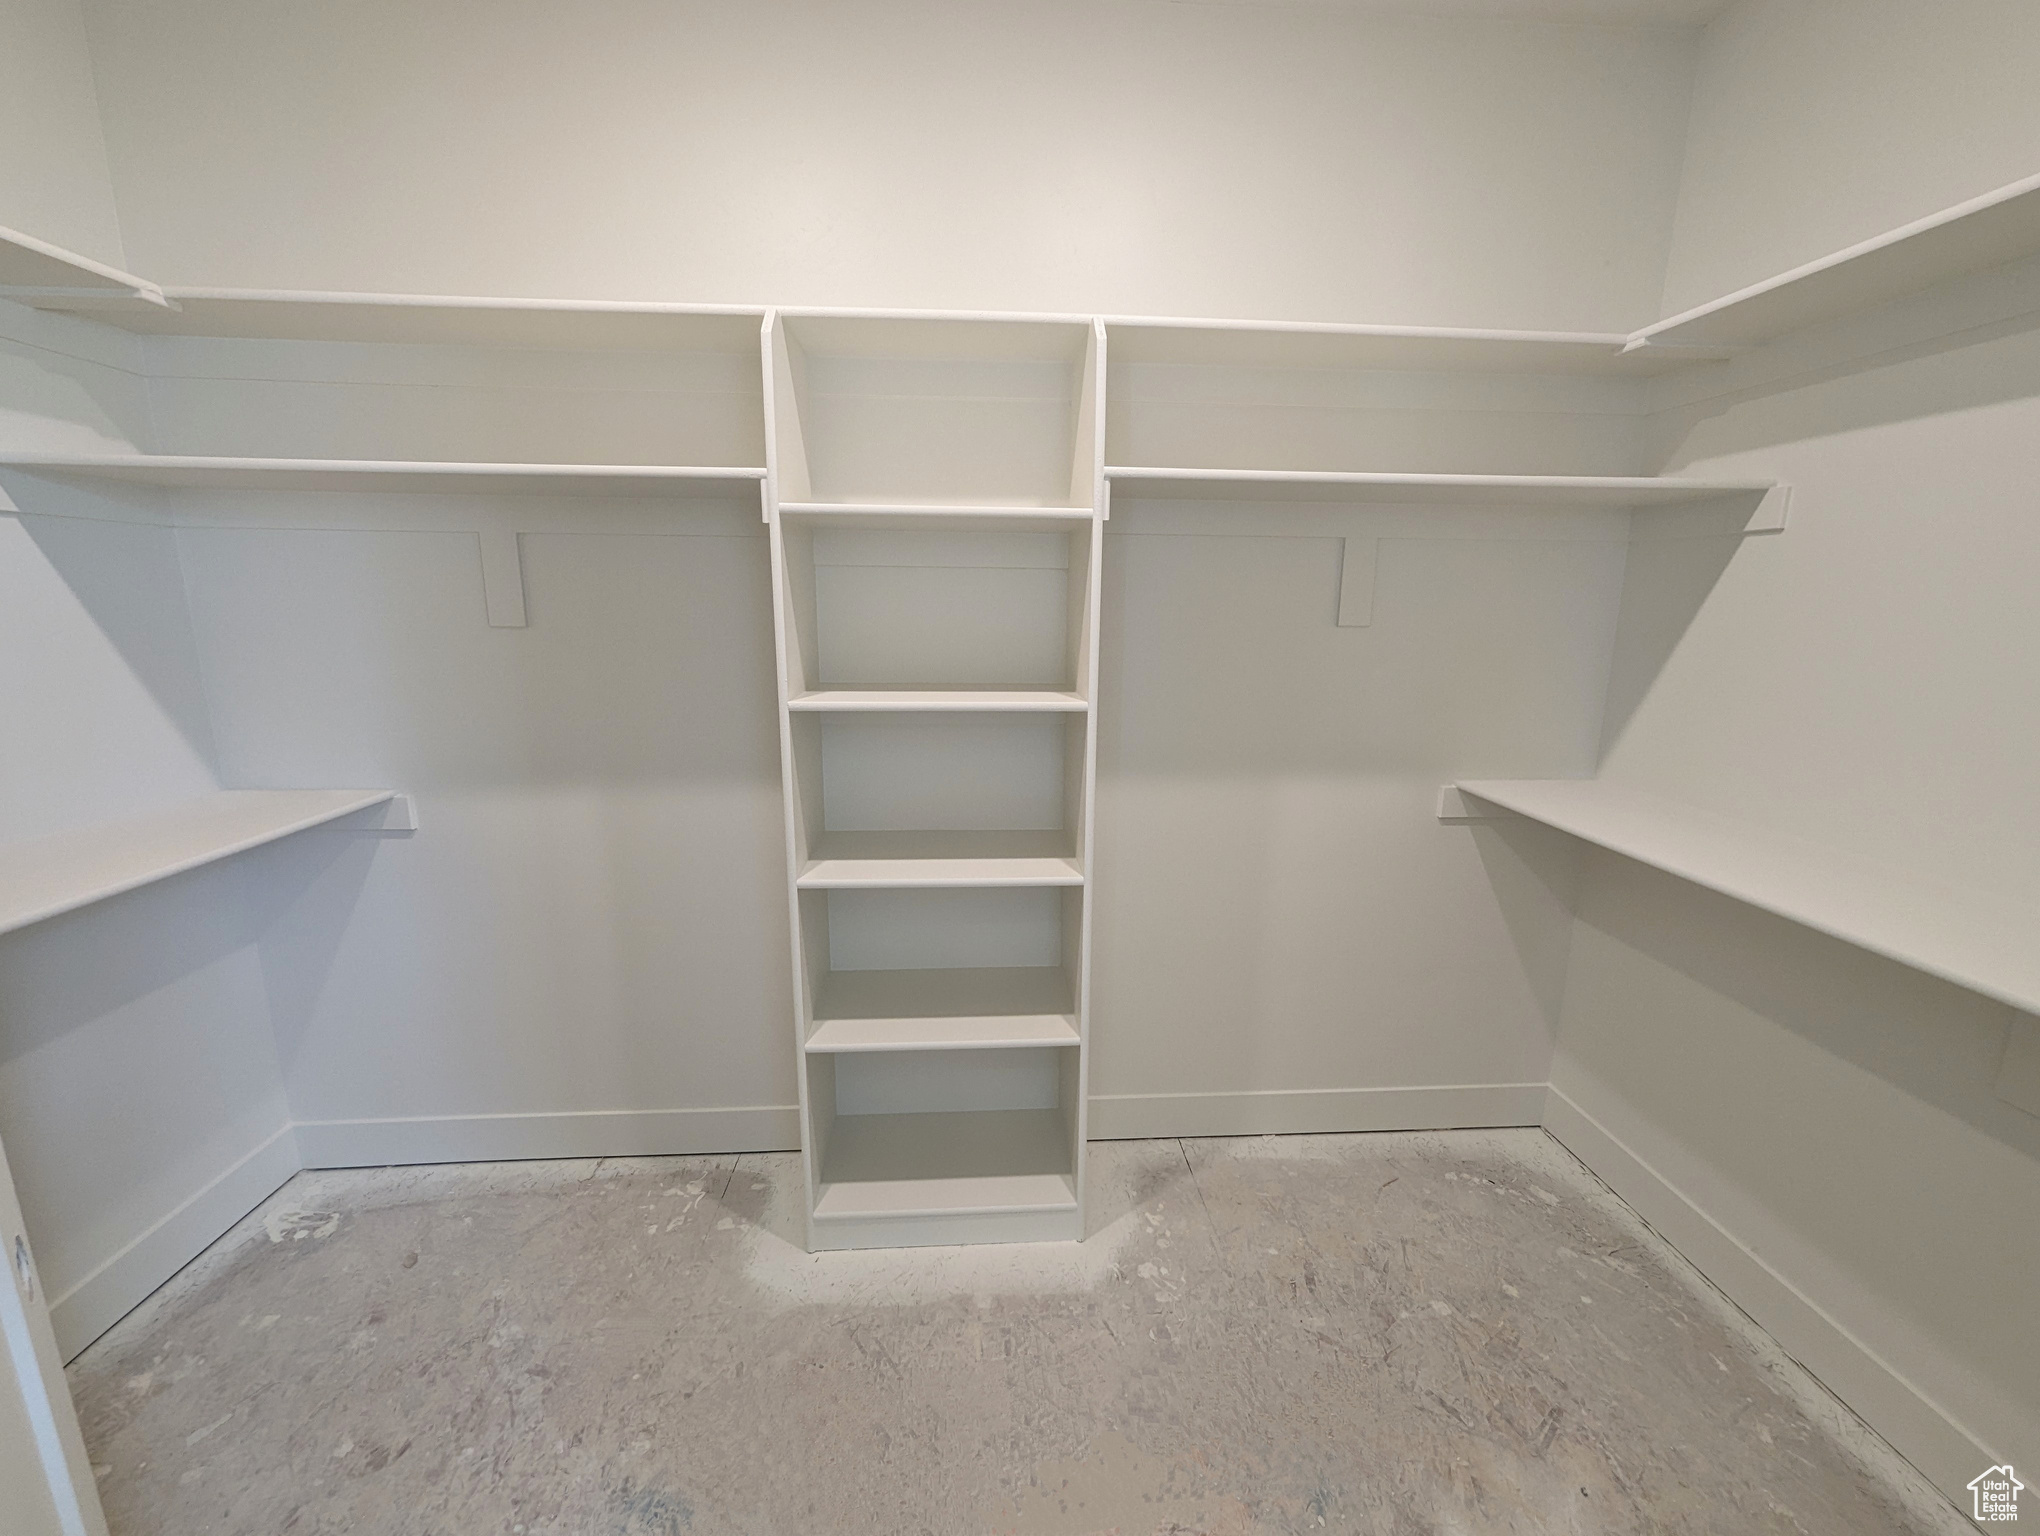 Primary walk-in closet as of 4-17-24